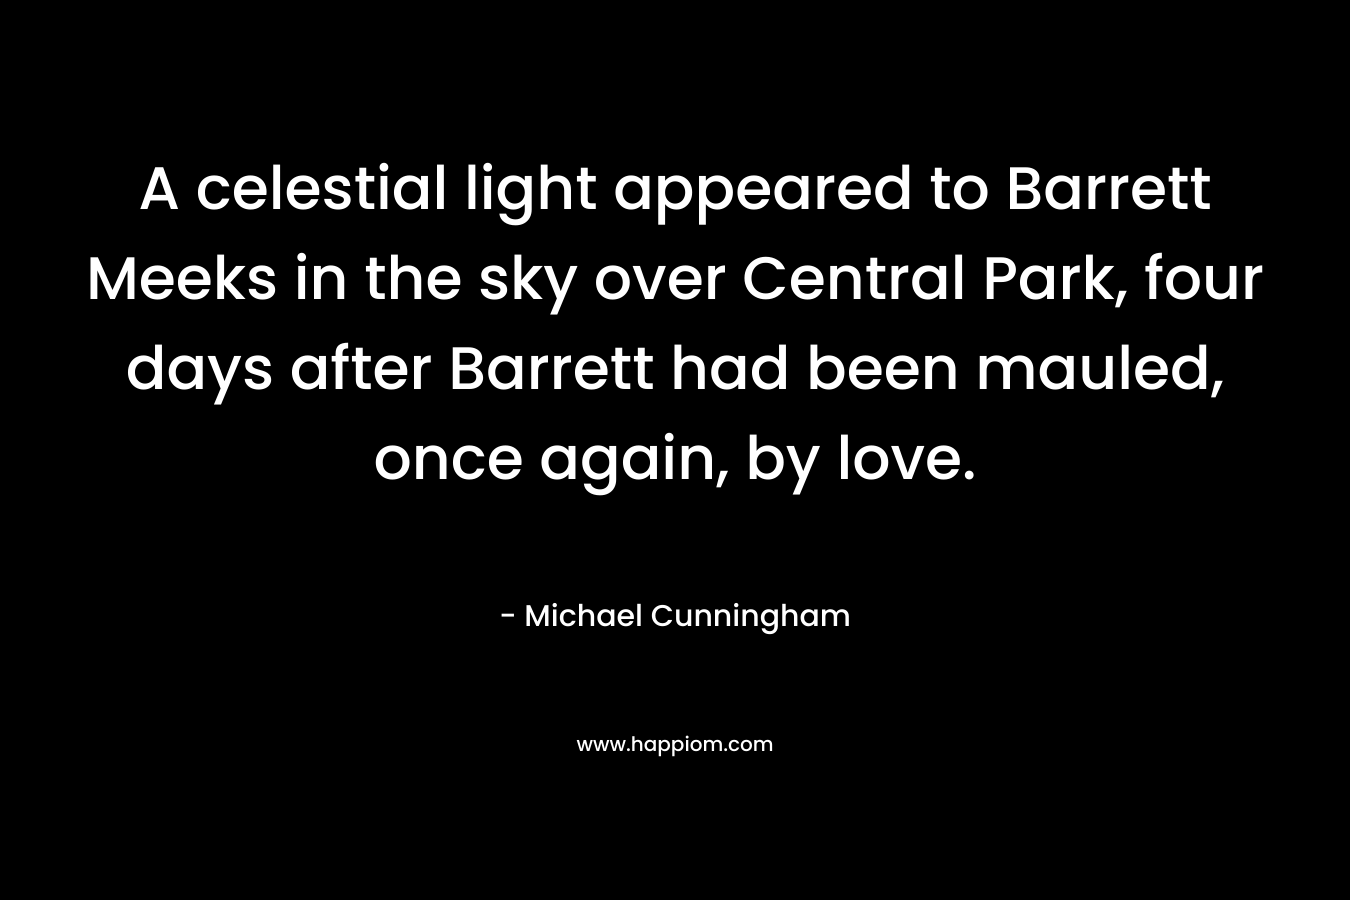 A celestial light appeared to Barrett Meeks in the sky over Central Park, four days after Barrett had been mauled, once again, by love. – Michael Cunningham